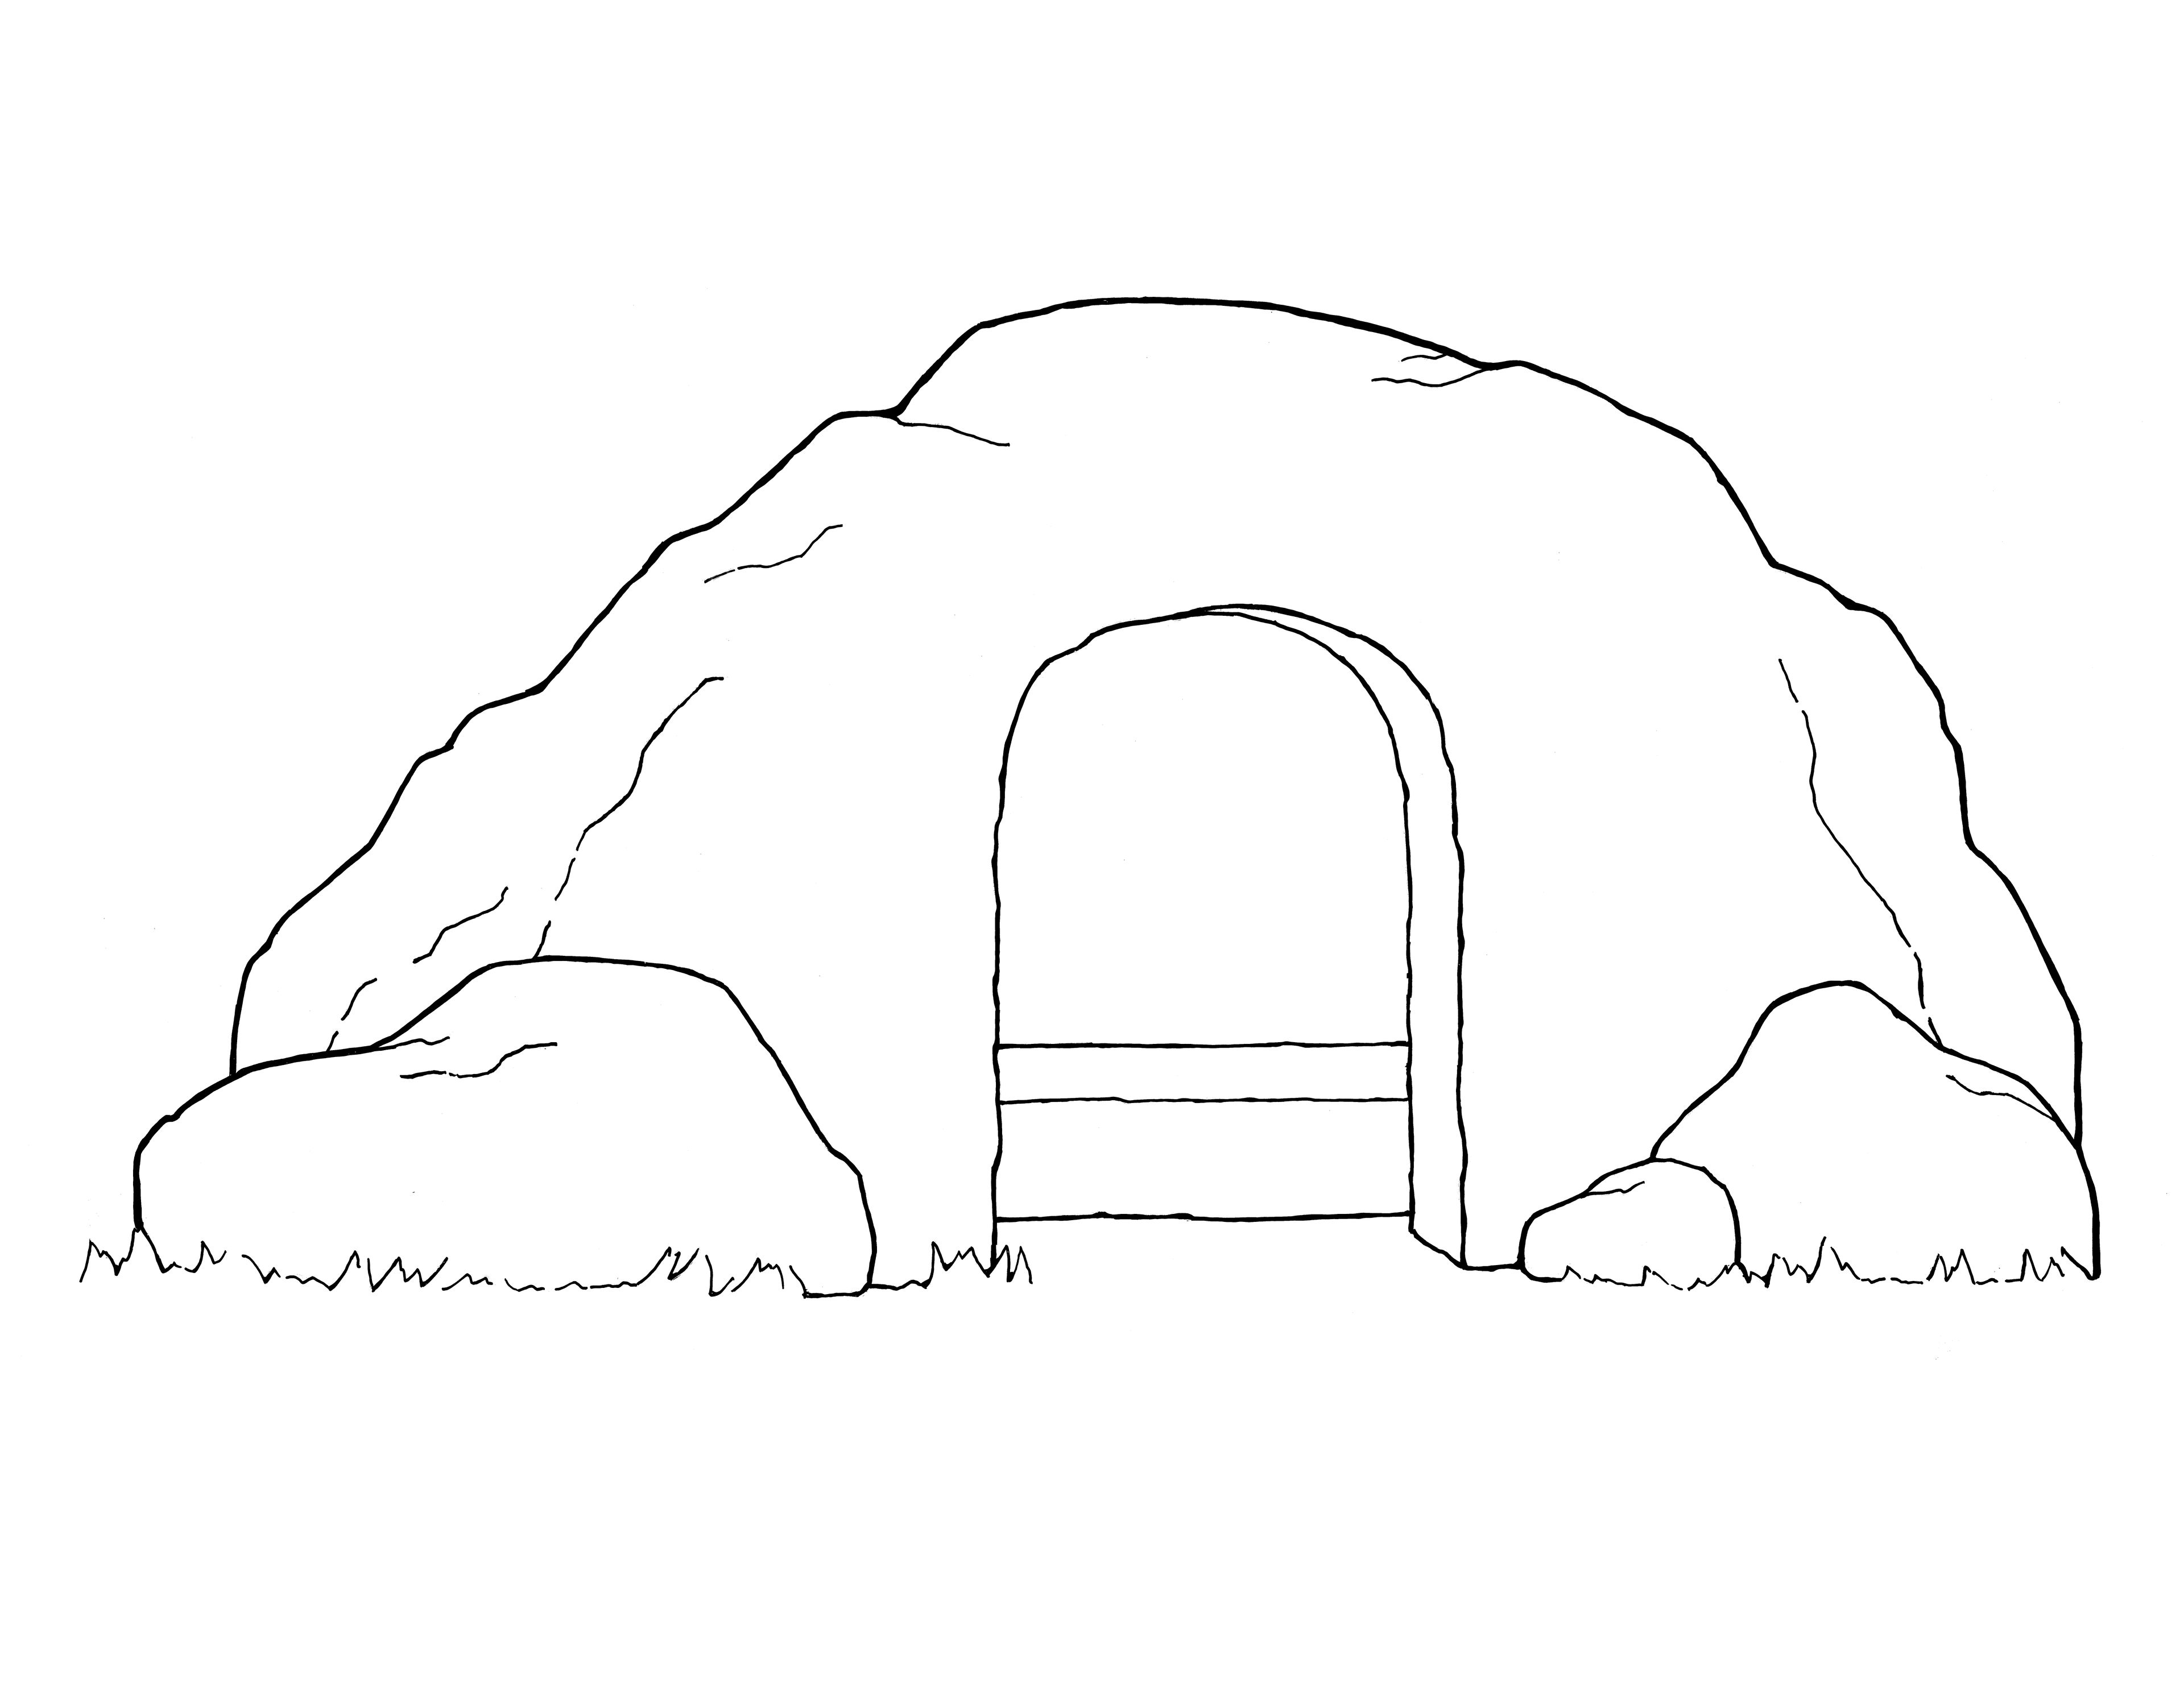 An illustration of the empty tomb, from the nursery manual Behold Your Little Ones (2008), page 123.